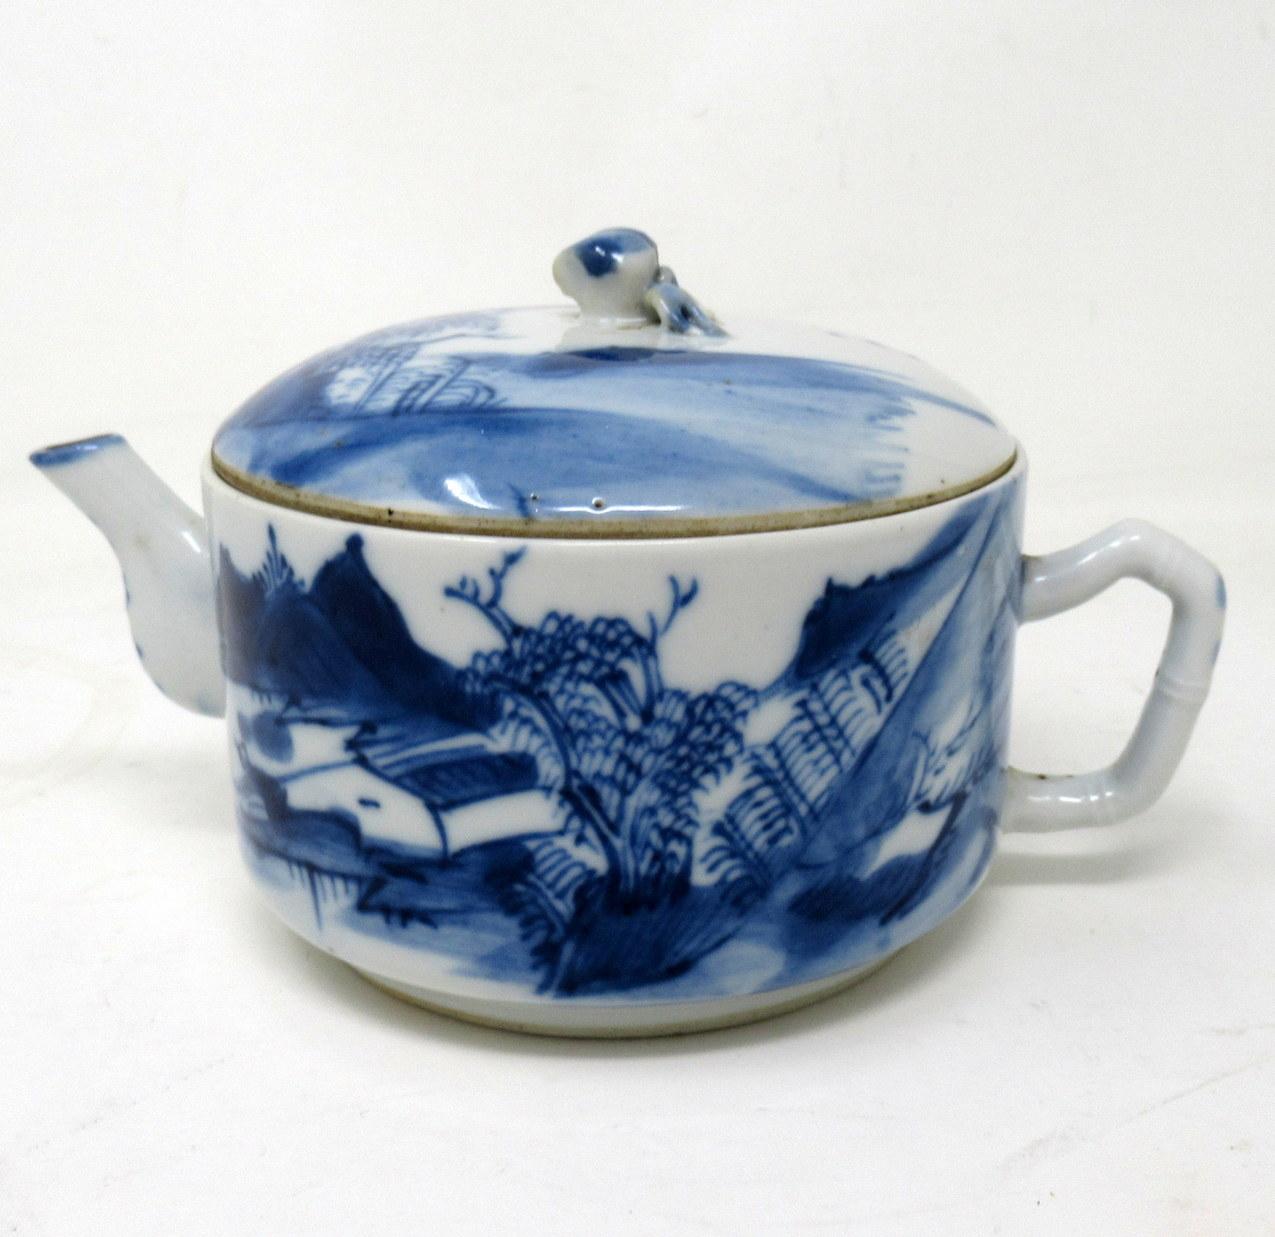 A very fine example of an early Chinese Export hand decorated blue and white porcelain teapot Jar of compact size, superbly decorated depicting an Oriental village scene, the finial cover with similar decoration. Circa 1800-1830. 

Together with an